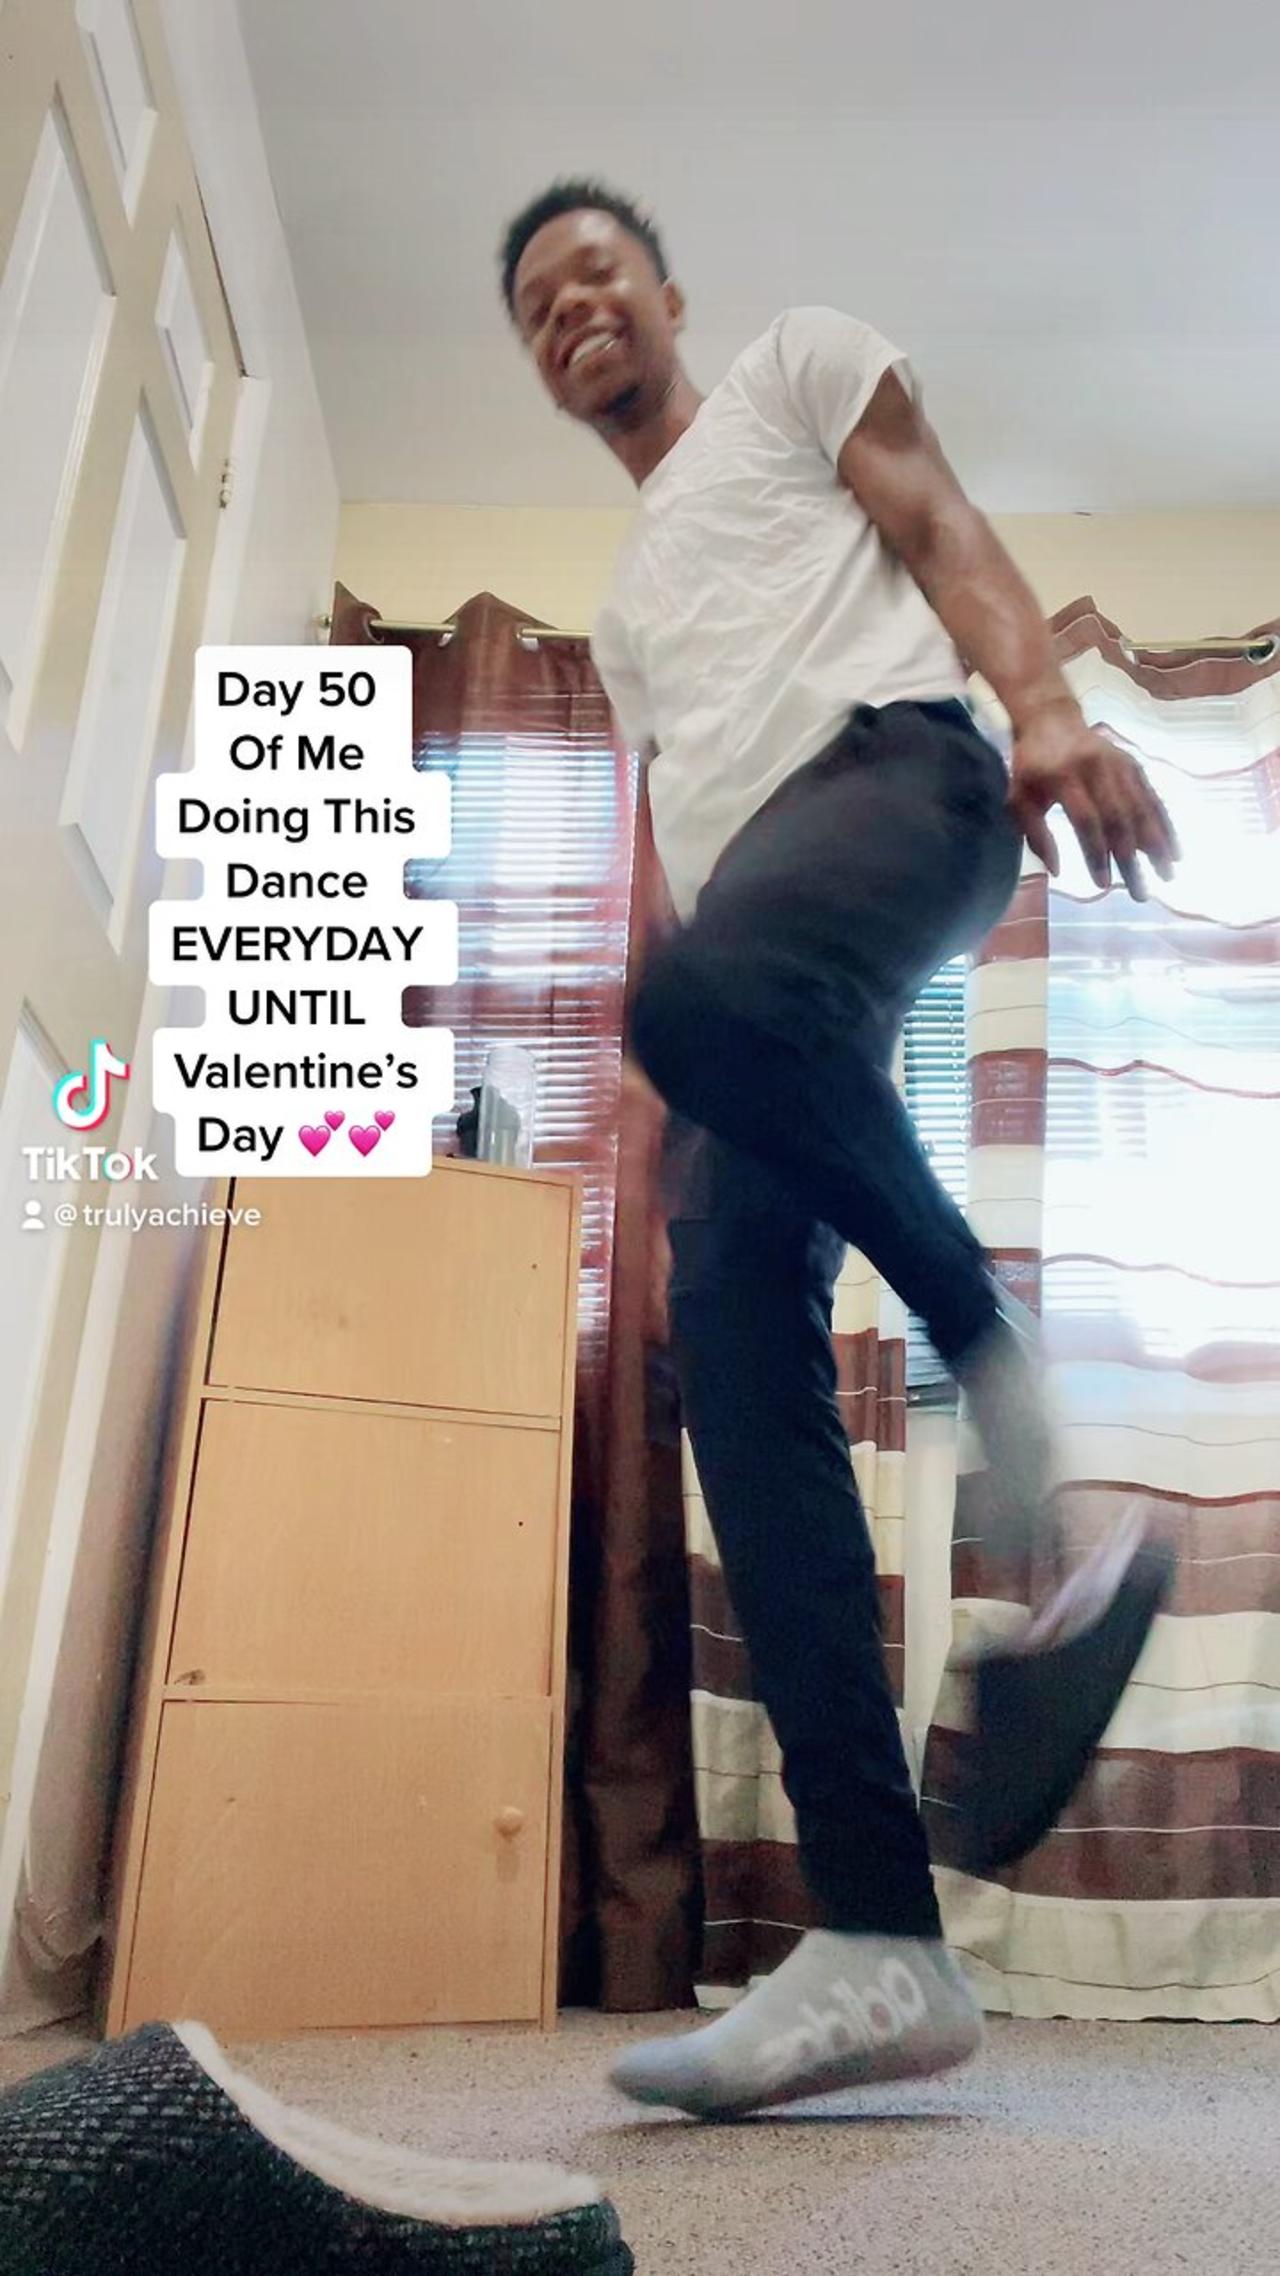 Day 50 Of Me Doing This TikTok Dance EVERYDAY Until Valentine’s Day